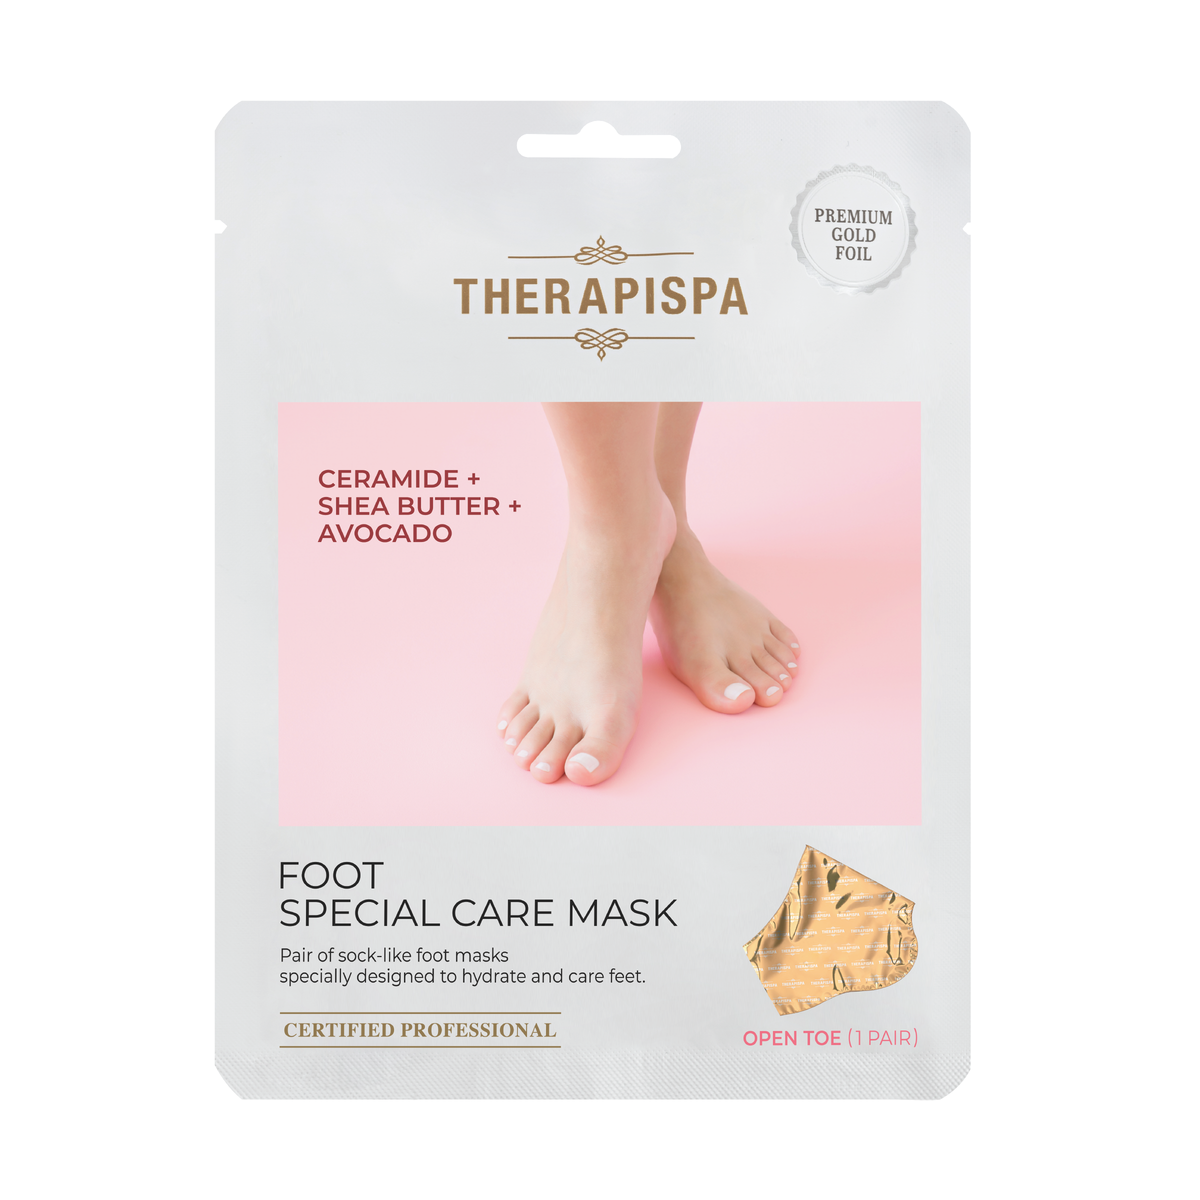 Foot Special Care Mask / Open Toe Edition (1 Pair)